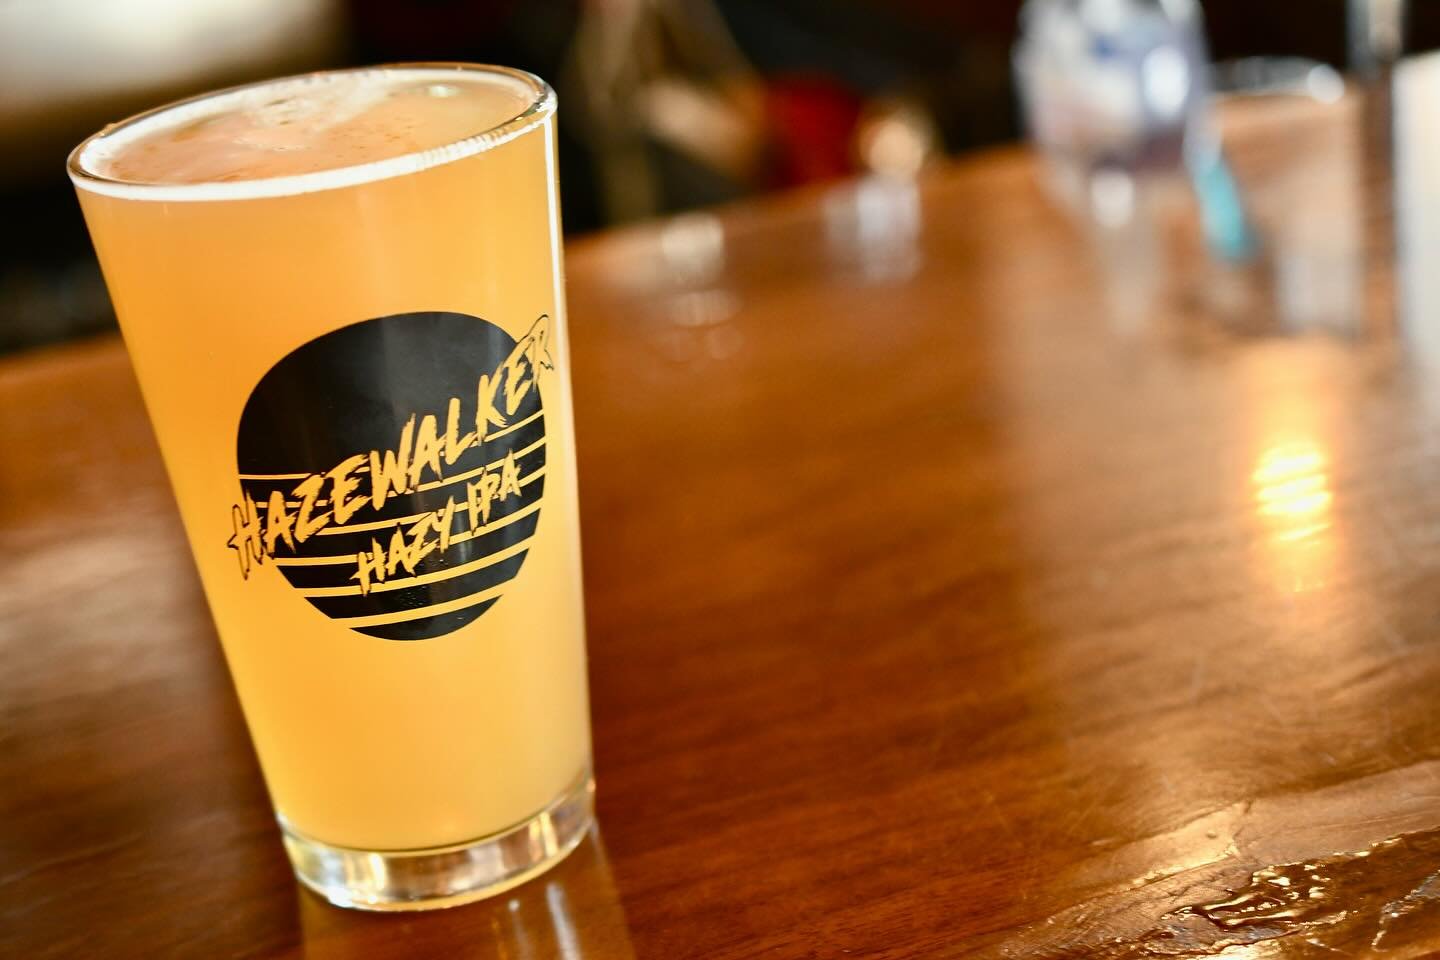 Hey! We&rsquo;re open at 12pm today! 
☀️☀️☀️ ☀️☀️☀️☀️
The sun is out for the week and I know our Hazy IPA is a good go to! Pay us a visit after the Wednesday market!